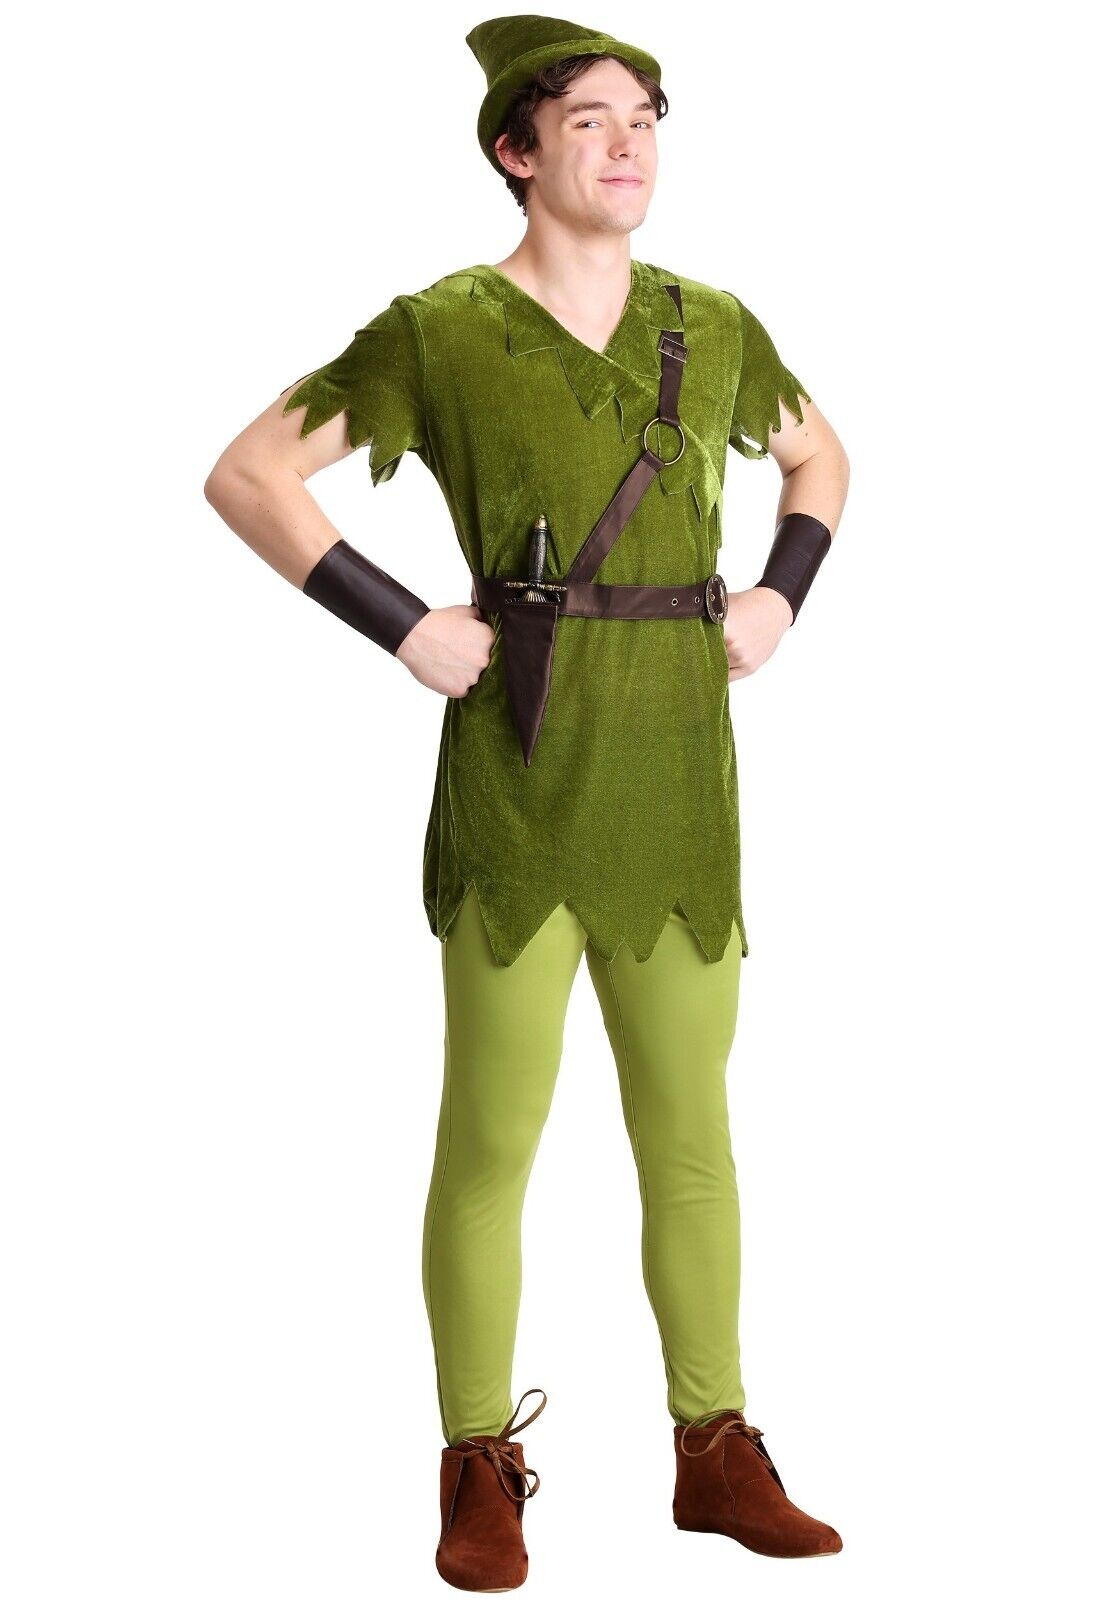 Adult Disney Classic Musical Peter Pan Costume SIZE PLUS 4X (Used)